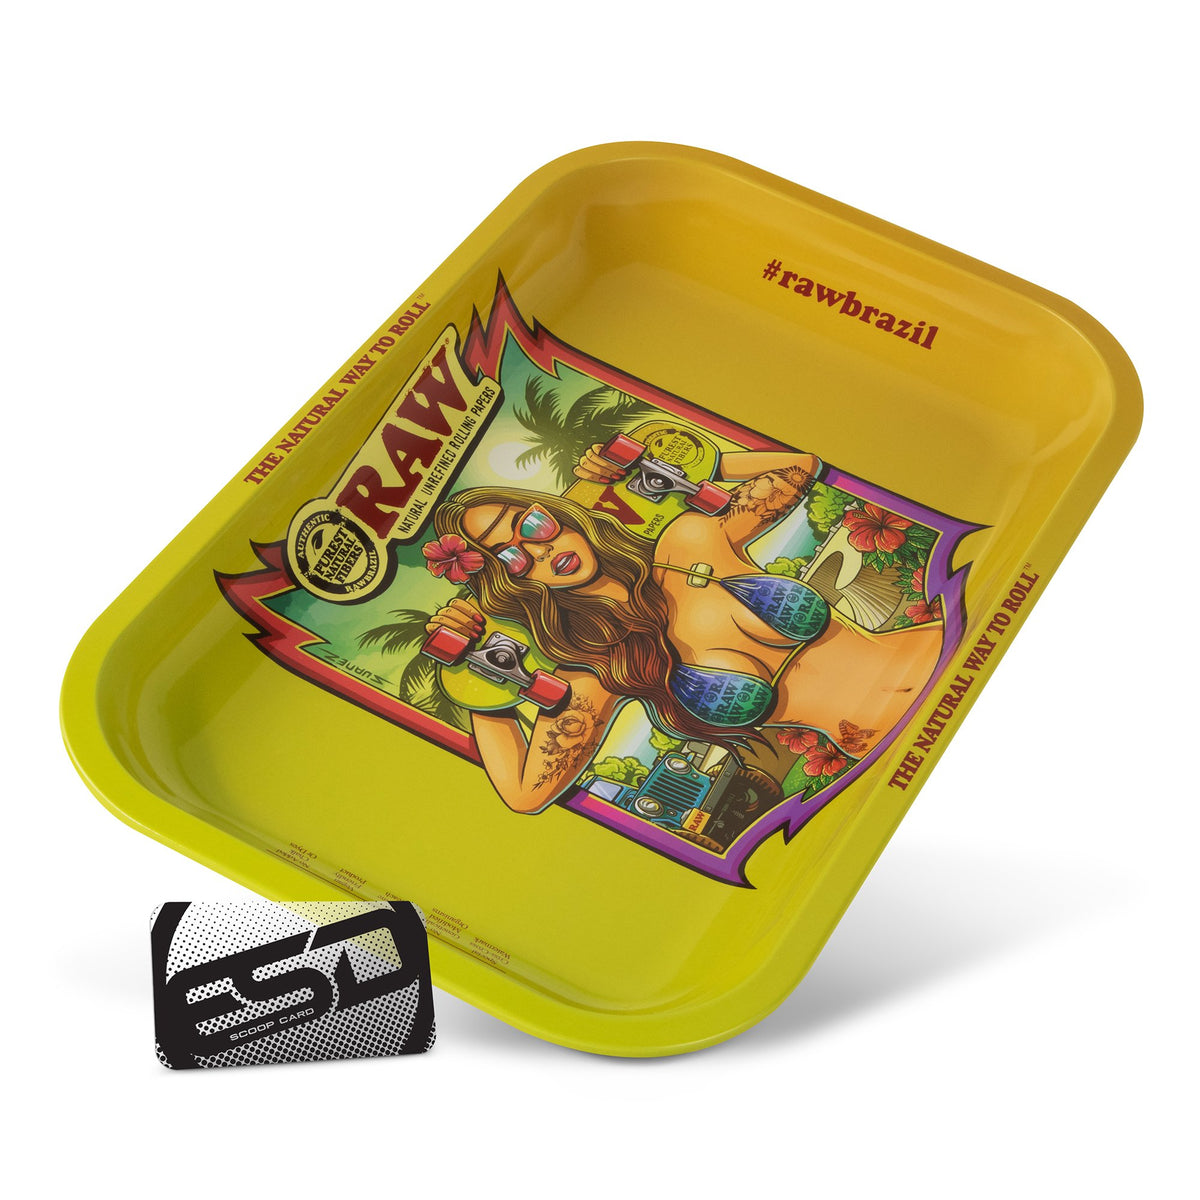 RAW Brazil 2nd Edition Rolling Tray | Small Rolling Trays WAR00152-MUSA01 esd-official